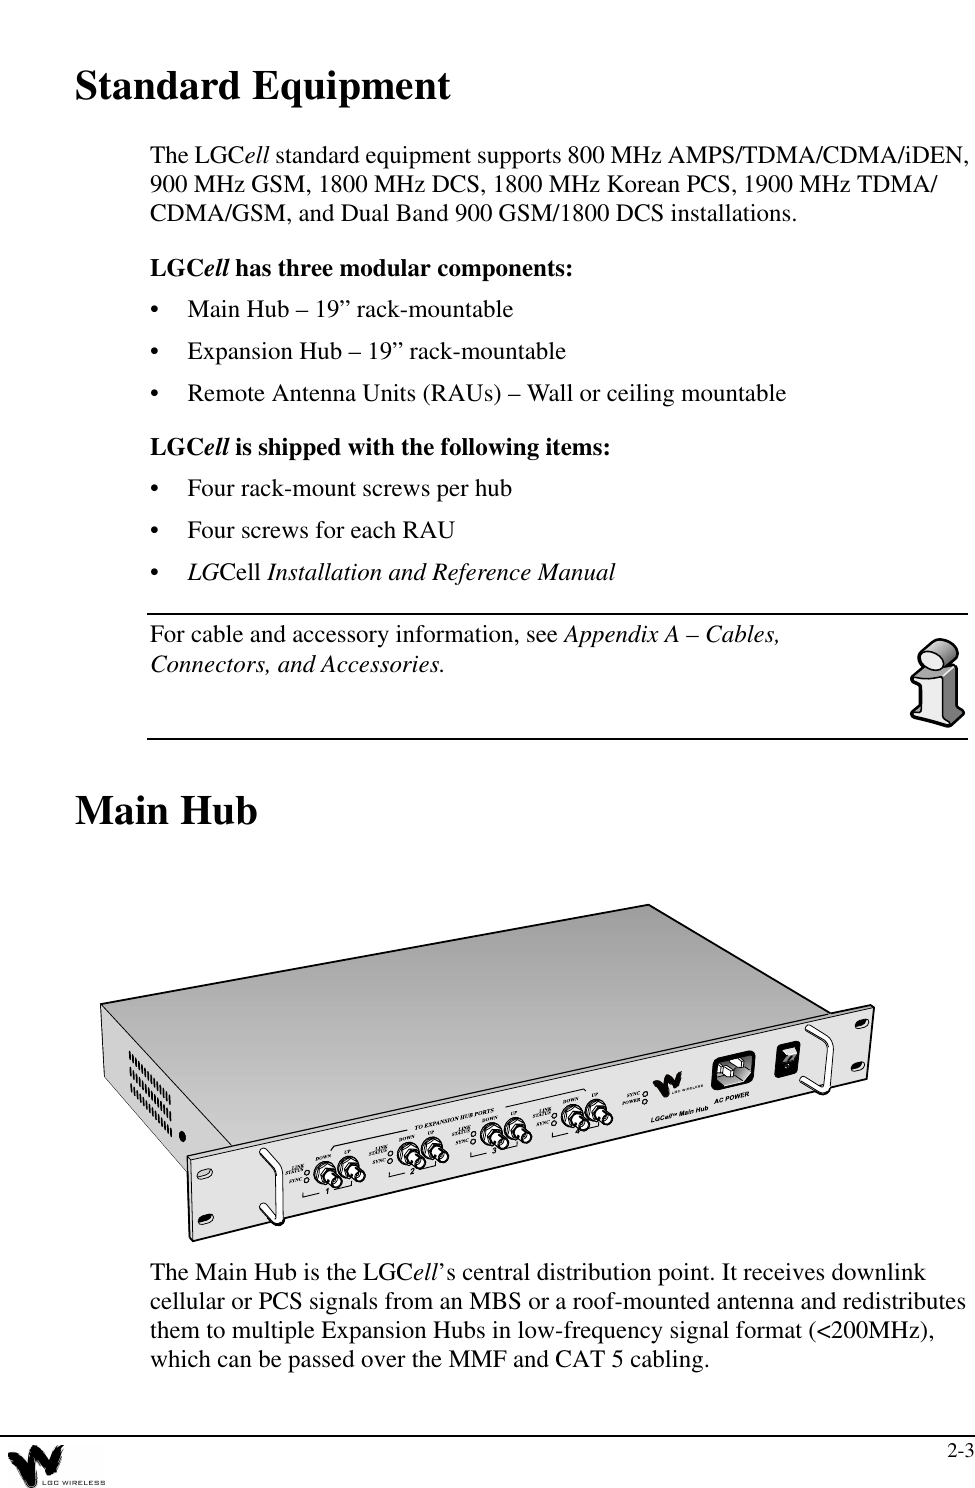 2-3Standard EquipmentThe LGCell standard equipment supports 800 MHz AMPS/TDMA/CDMA/iDEN, 900 MHz GSM, 1800 MHz DCS, 1800 MHz Korean PCS, 1900 MHz TDMA/CDMA/GSM, and Dual Band 900 GSM/1800 DCS installations.LGCell has three modular components:•Main Hub – 19” rack-mountable•Expansion Hub – 19” rack-mountable•Remote Antenna Units (RAUs) – Wall or ceiling mountableLGCell is shipped with the following items:•Four rack-mount screws per hub•Four screws for each RAU•LGCell Installation and Reference ManualFor cable and accessory information, see Appendix A – Cables, Connectors, and Accessories.Main HubThe Main Hub is the LGCell’s central distribution point. It receives downlink cellular or PCS signals from an MBS or a roof-mounted antenna and redistributes them to multiple Expansion Hubs in low-frequency signal format (&lt;200MHz), which can be passed over the MMF and CAT 5 cabling.